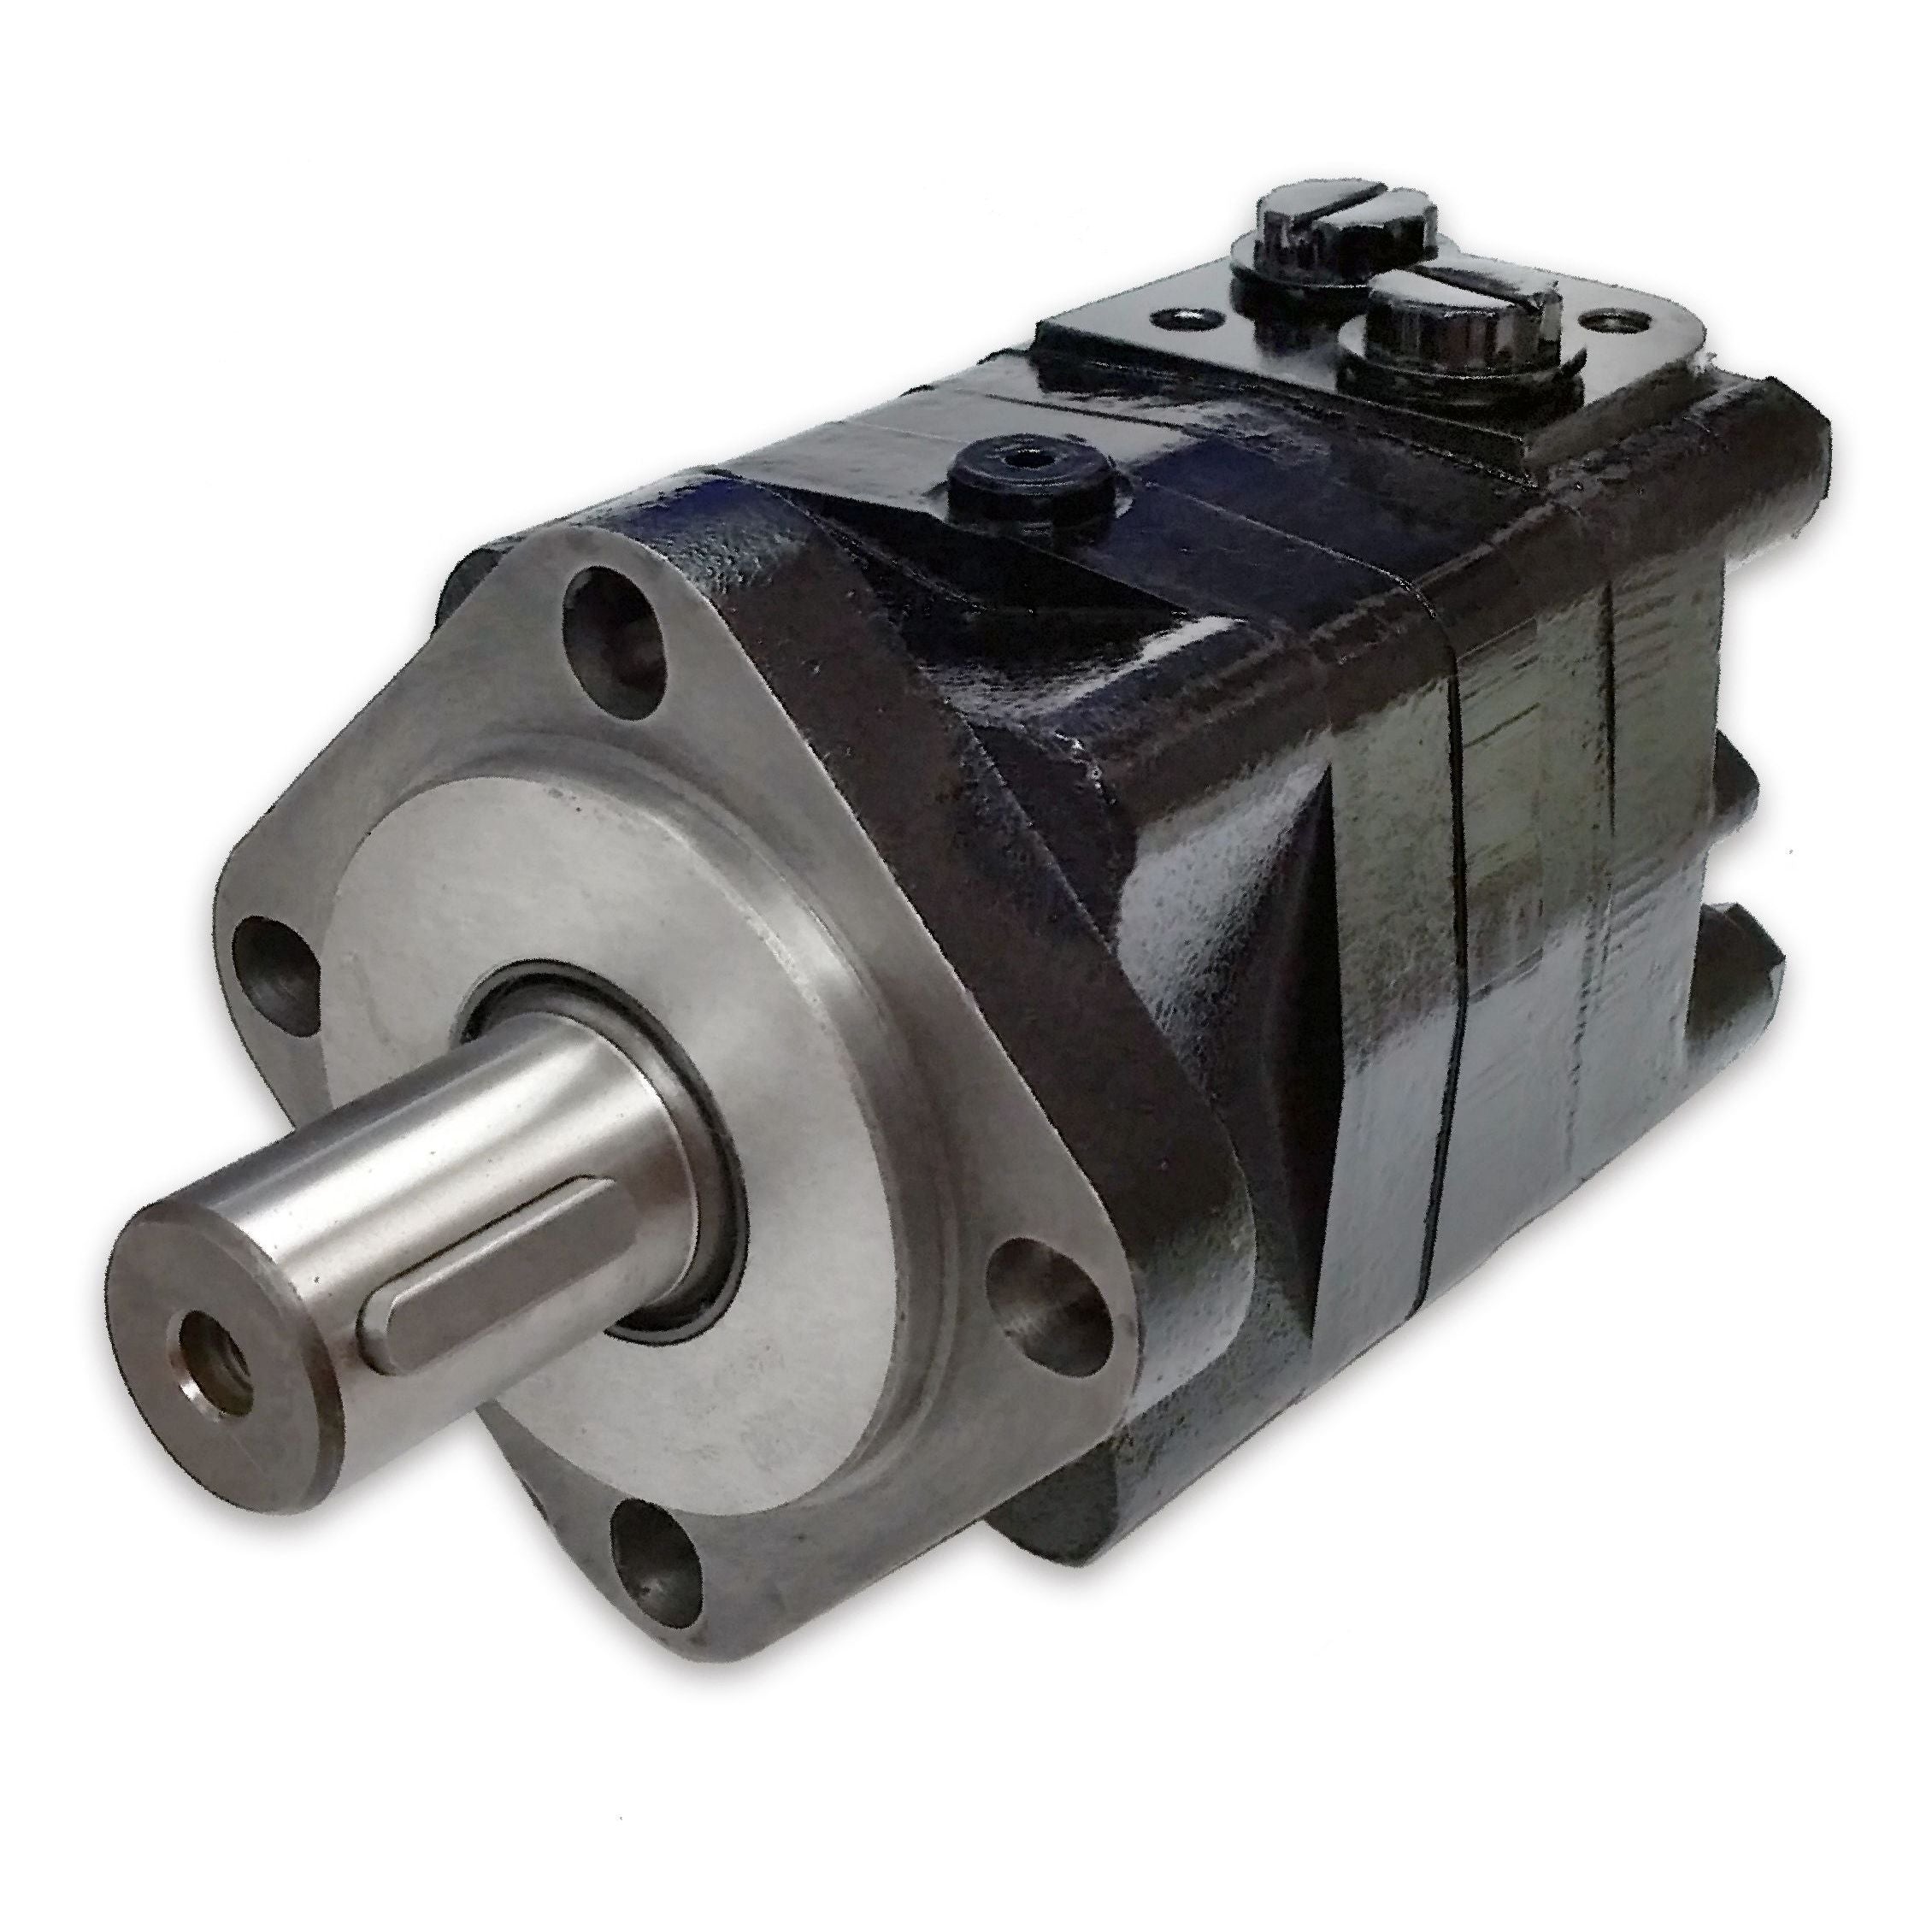 BMSY-315-E4-G-S : Dynamic LSHT Motor, 311cc, 240RPM, 7787in-lb, 2900psi Differential, 19.81GPM, SAE A 4-Bolt Mount, 1.25" Bore x 5/16" Key Shaft, Side Ported, #10 SAE (5/8")